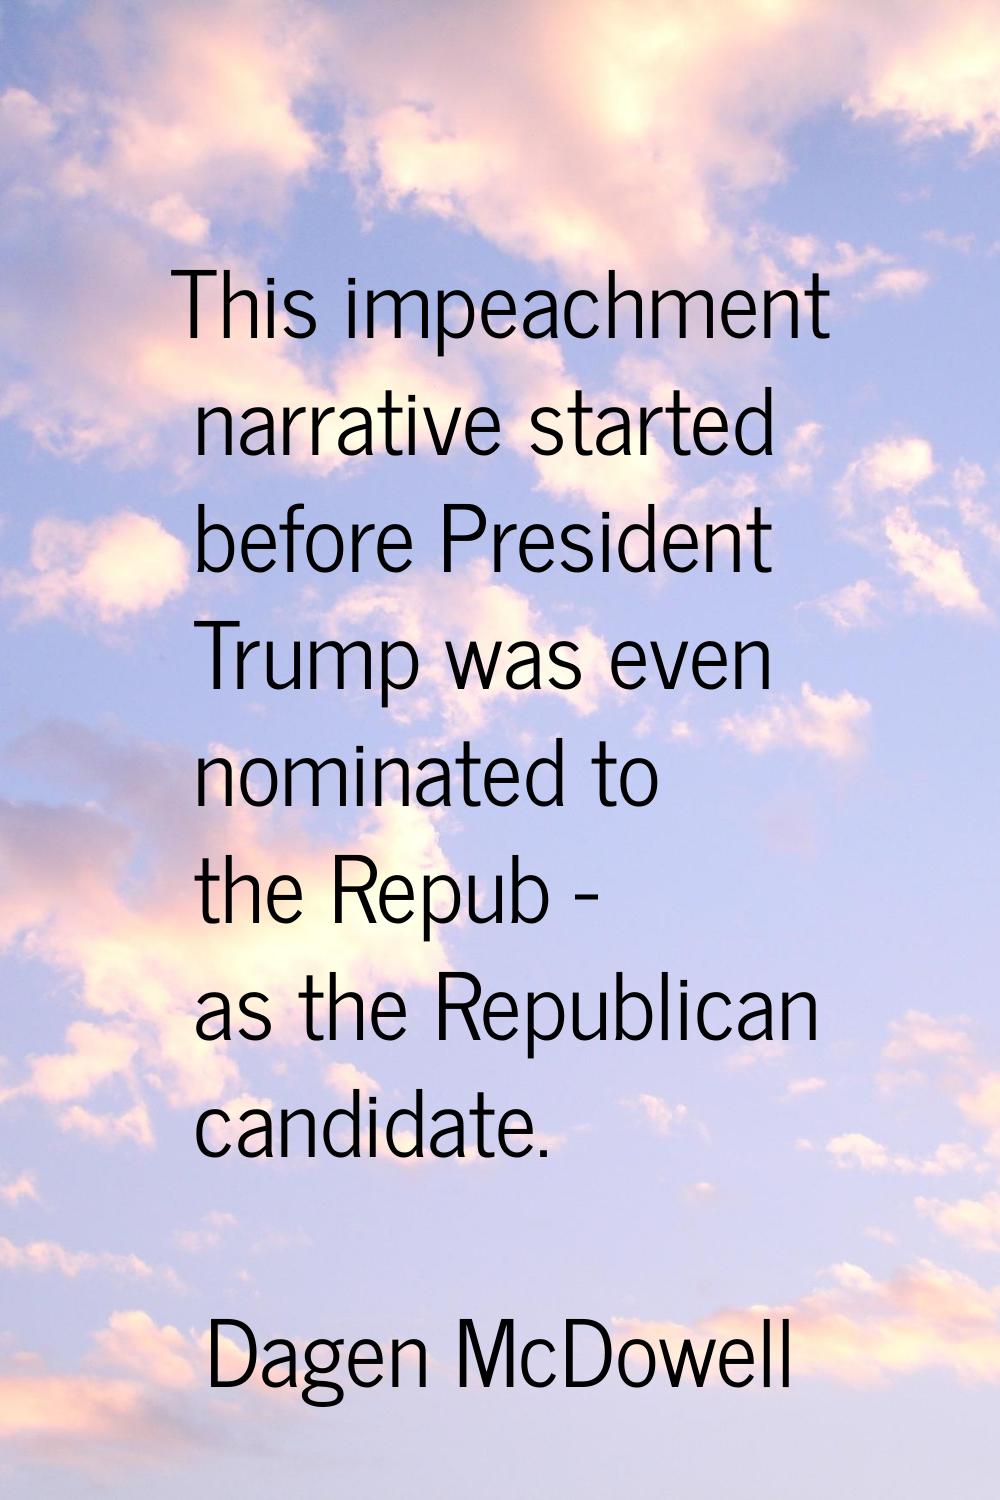 This impeachment narrative started before President Trump was even nominated to the Repub - as the 